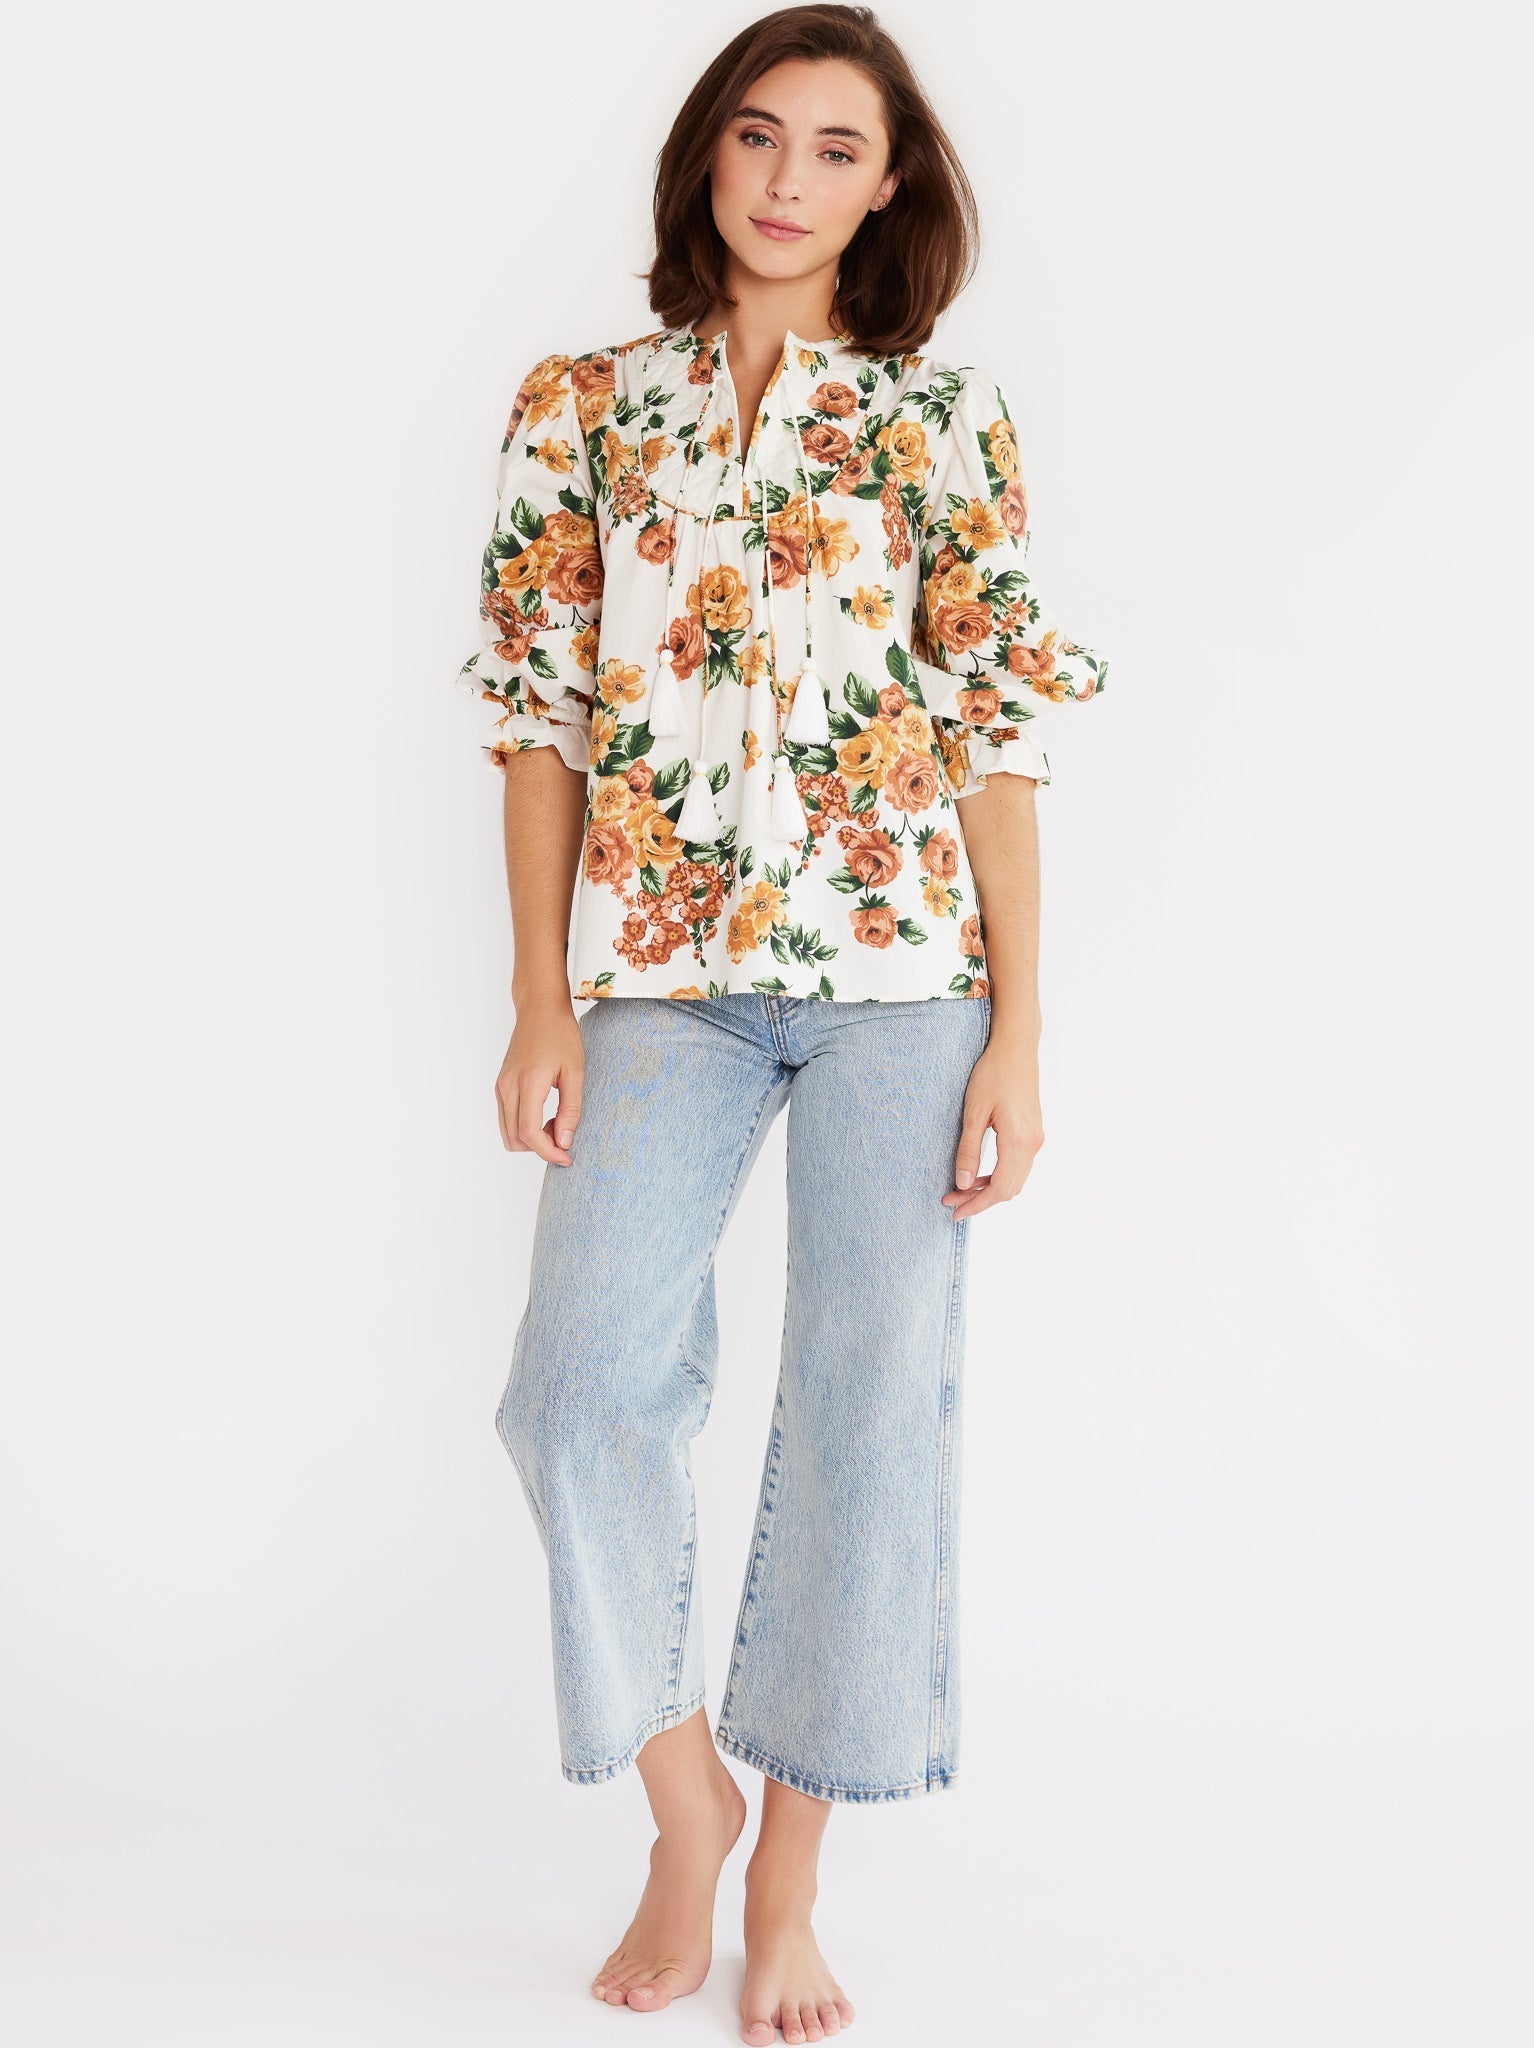 MILLE Clothing Guilia Top in Antique Rose Floral